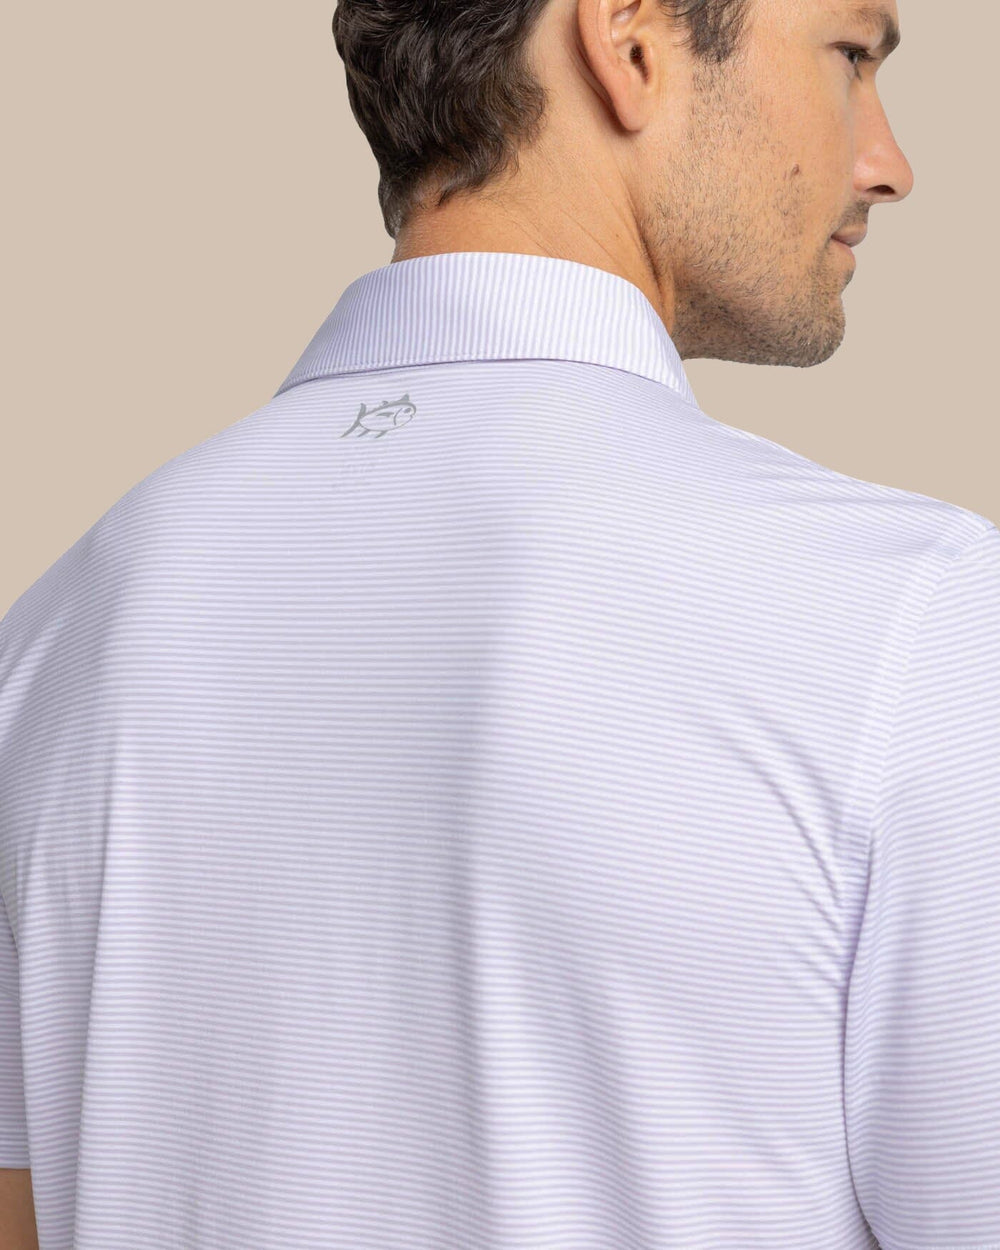 The detail view of the Southern Tide brrr-eeze Meadowbrook Stripe Polo by Southern Tide - Orchid Petal